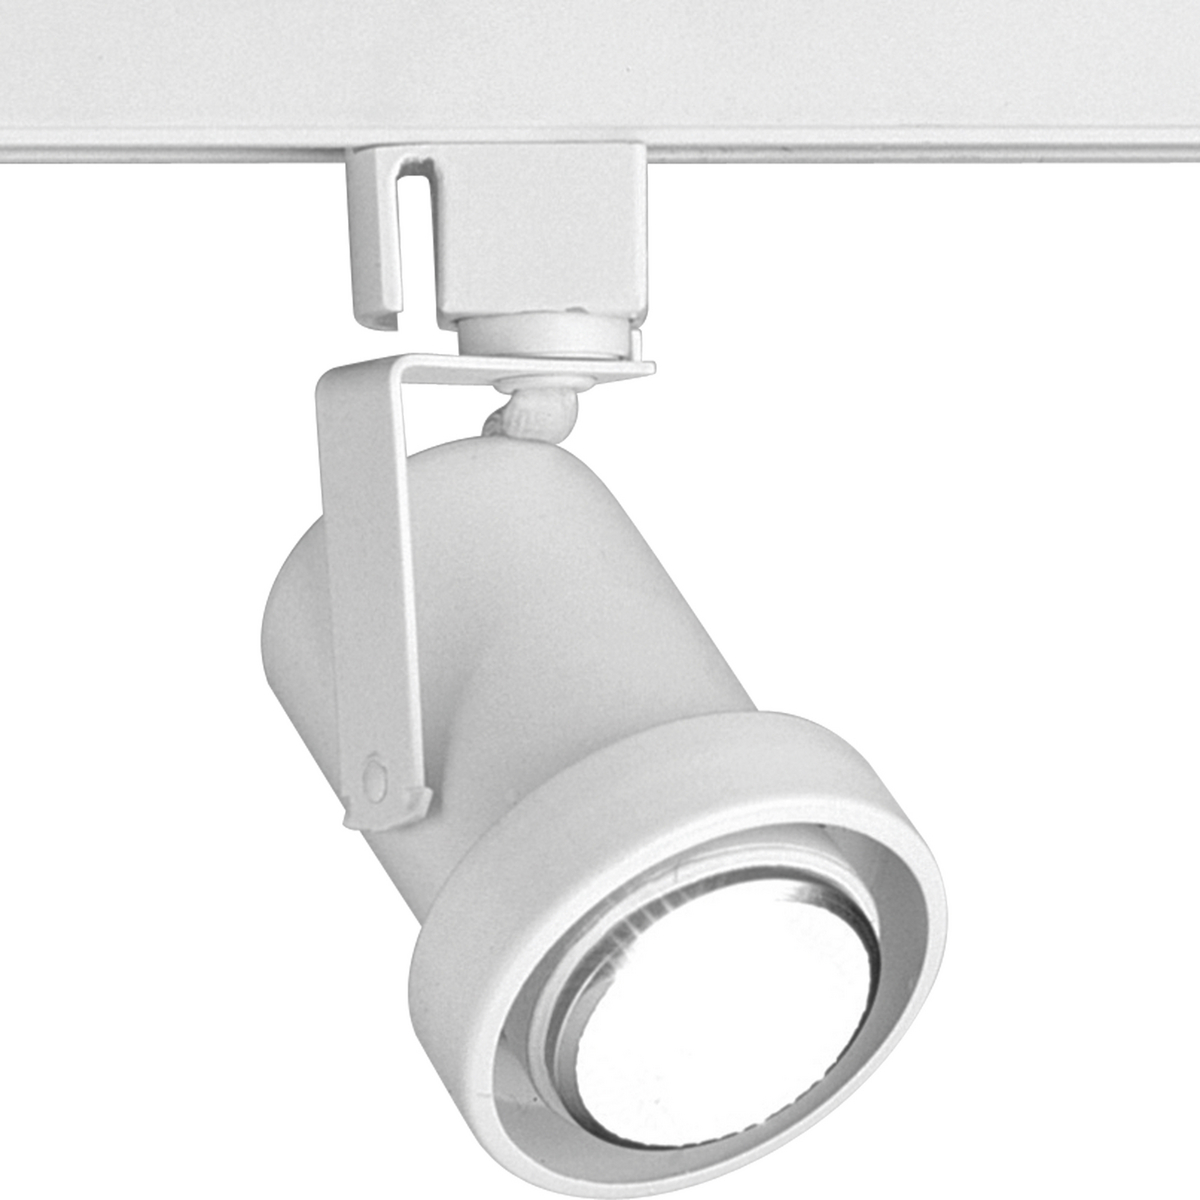 White high tech Alpha Trak track head with 360 degree horizontal rotation and 90 degree vertical rotation. Heads can be easily repositioned on the track to provide lighting in different areas of the room. Excellent for both residential and retail locations. Use one 75W PAR 16 bulb.